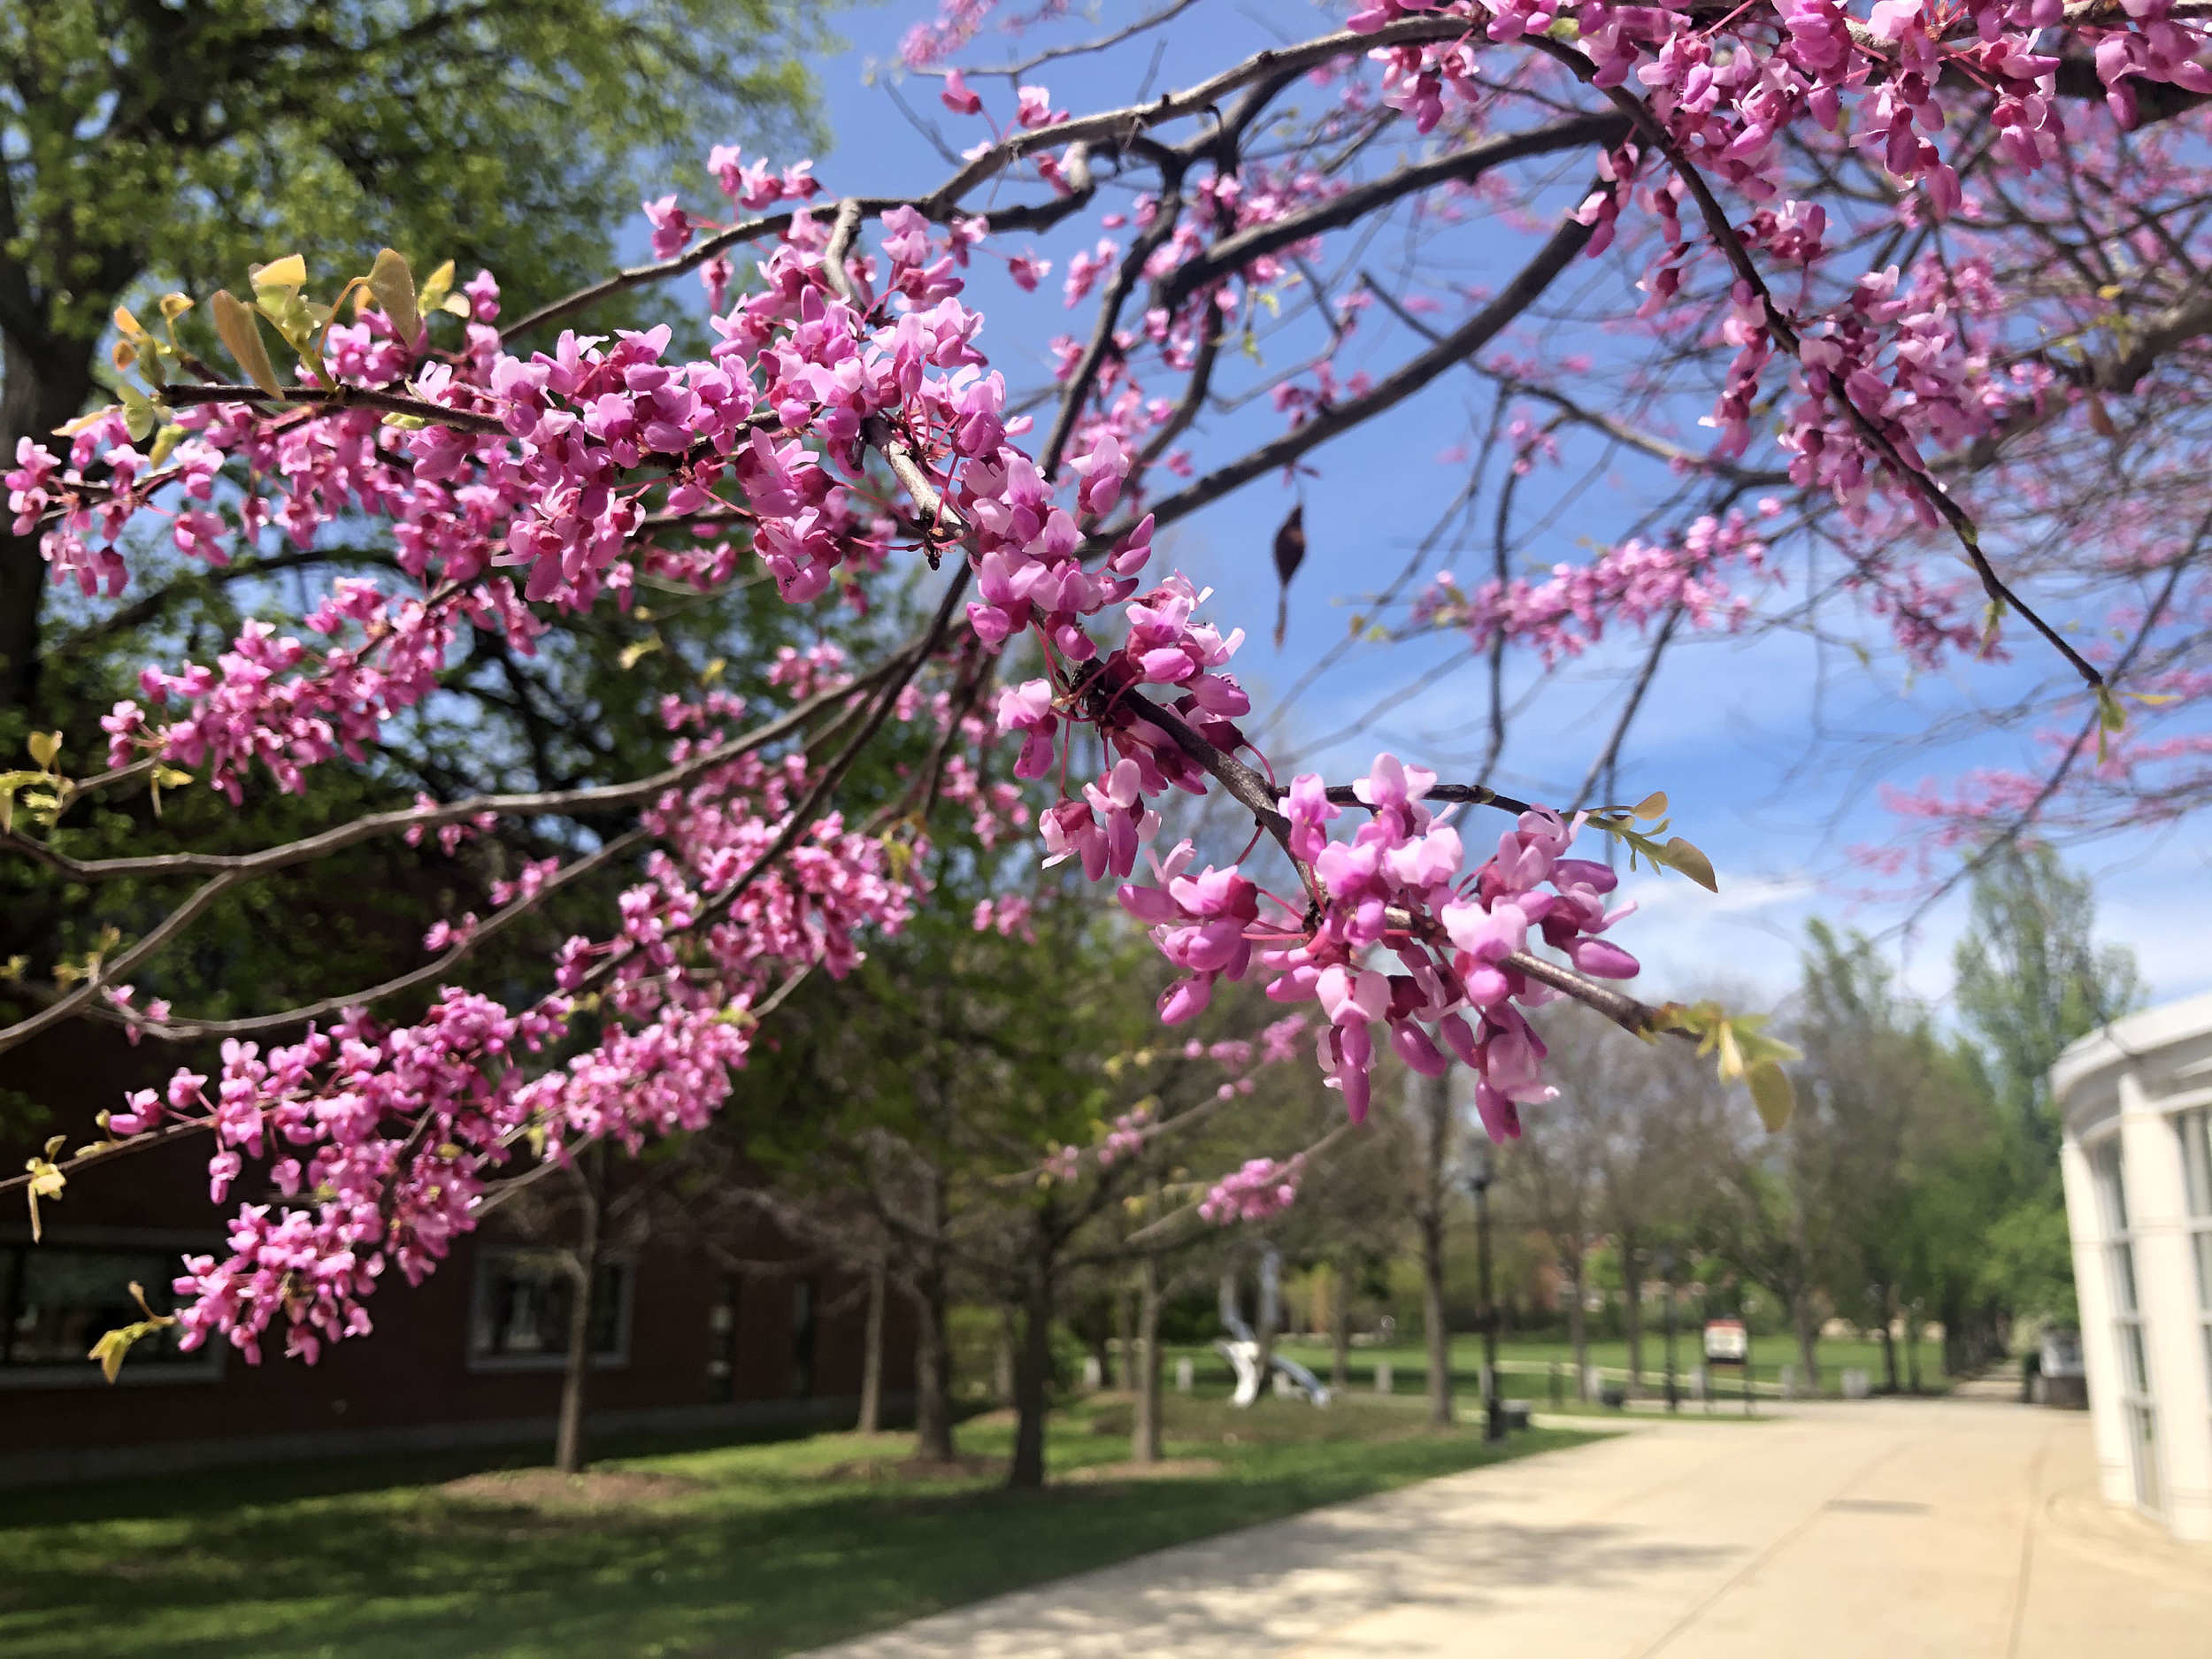 A redbud tree in bloom on the Keene State College campus. (photo © Brett Amy Thelen)